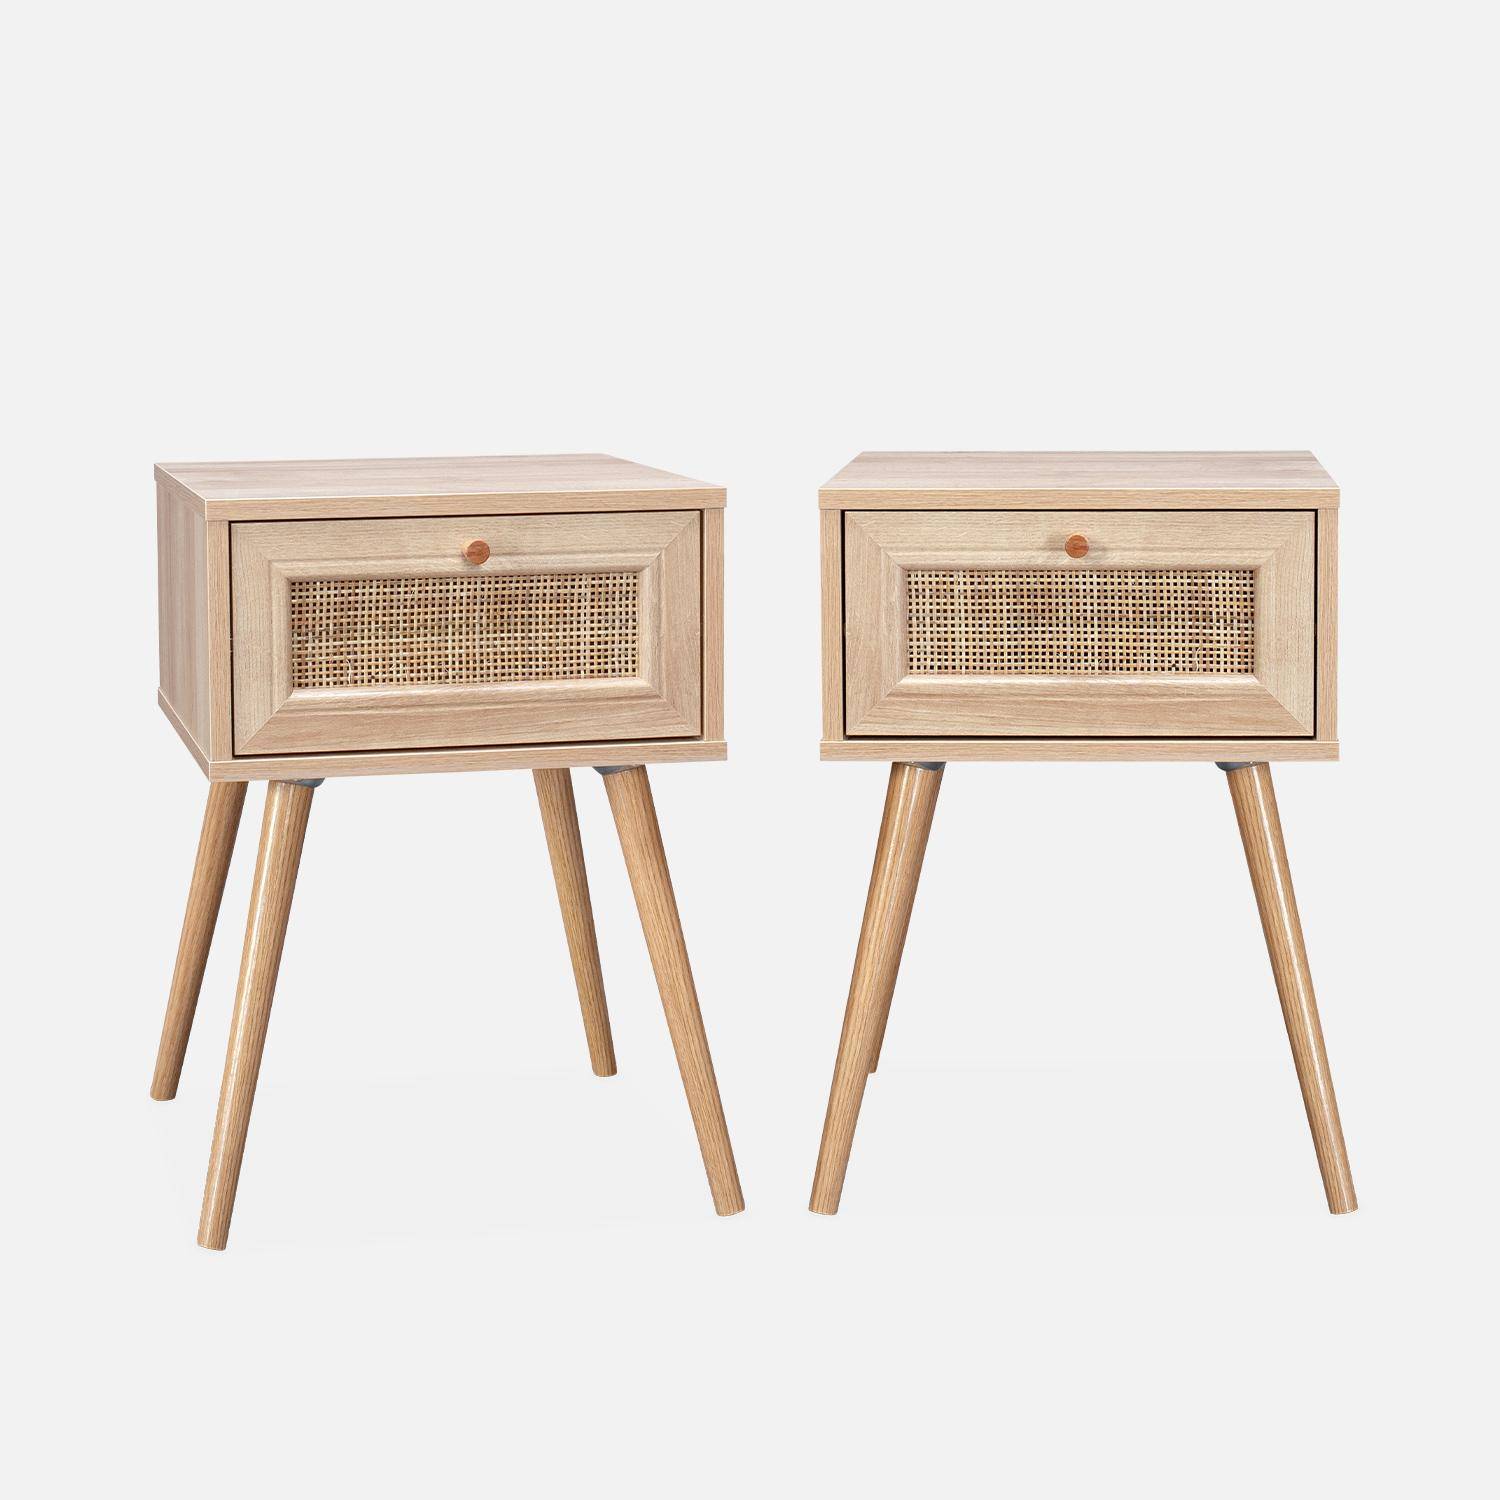 Pair of woven rattan bedside tables with drawer, 39x39x55.4cm - Boheme - Natural Wood colour,sweeek,Photo3